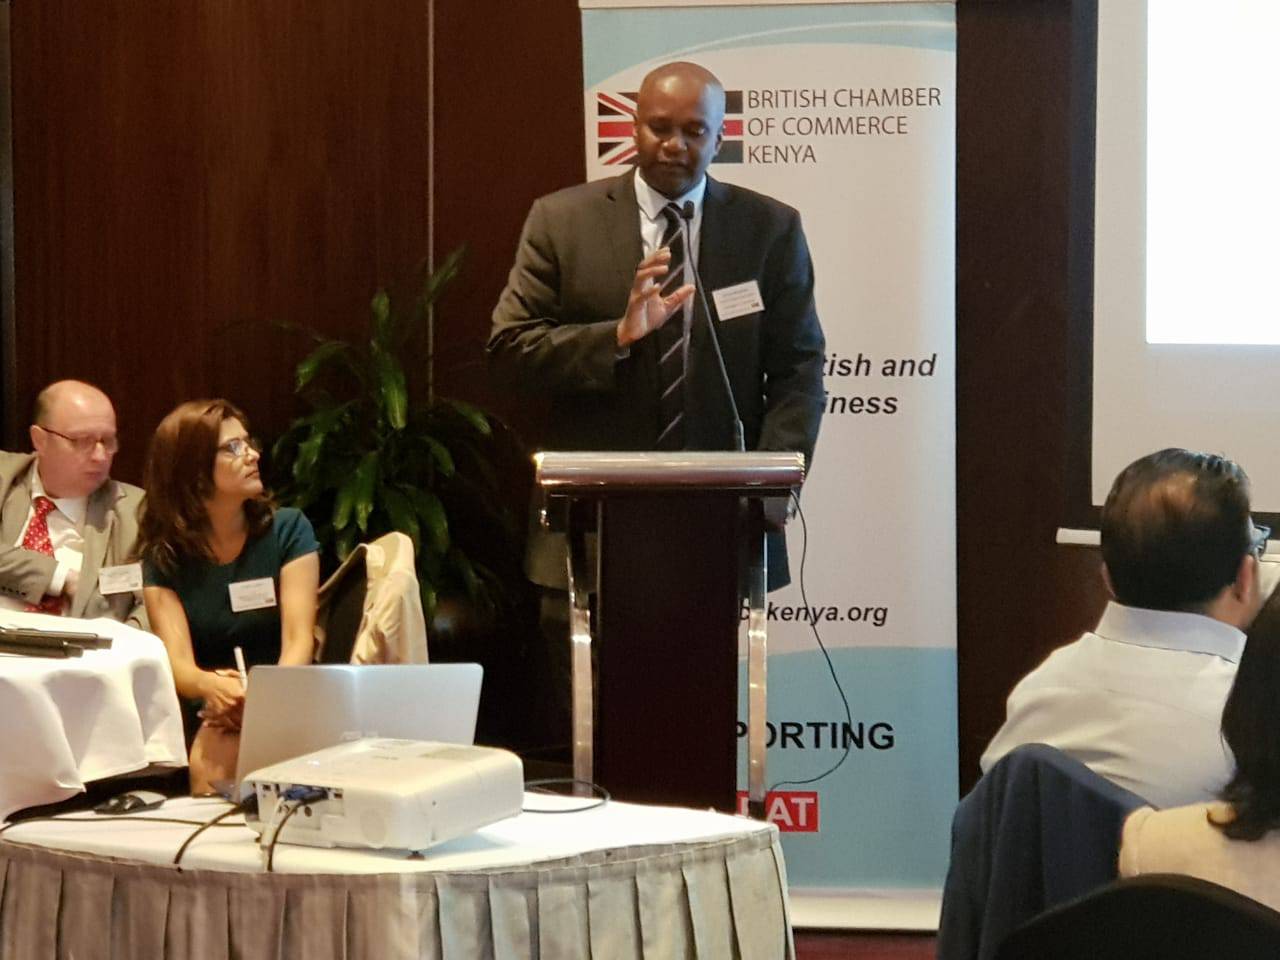 BCCK, PwC, UK Visa Process and Faraja Cancer support Networking Breakfast – 11th July 2019 11